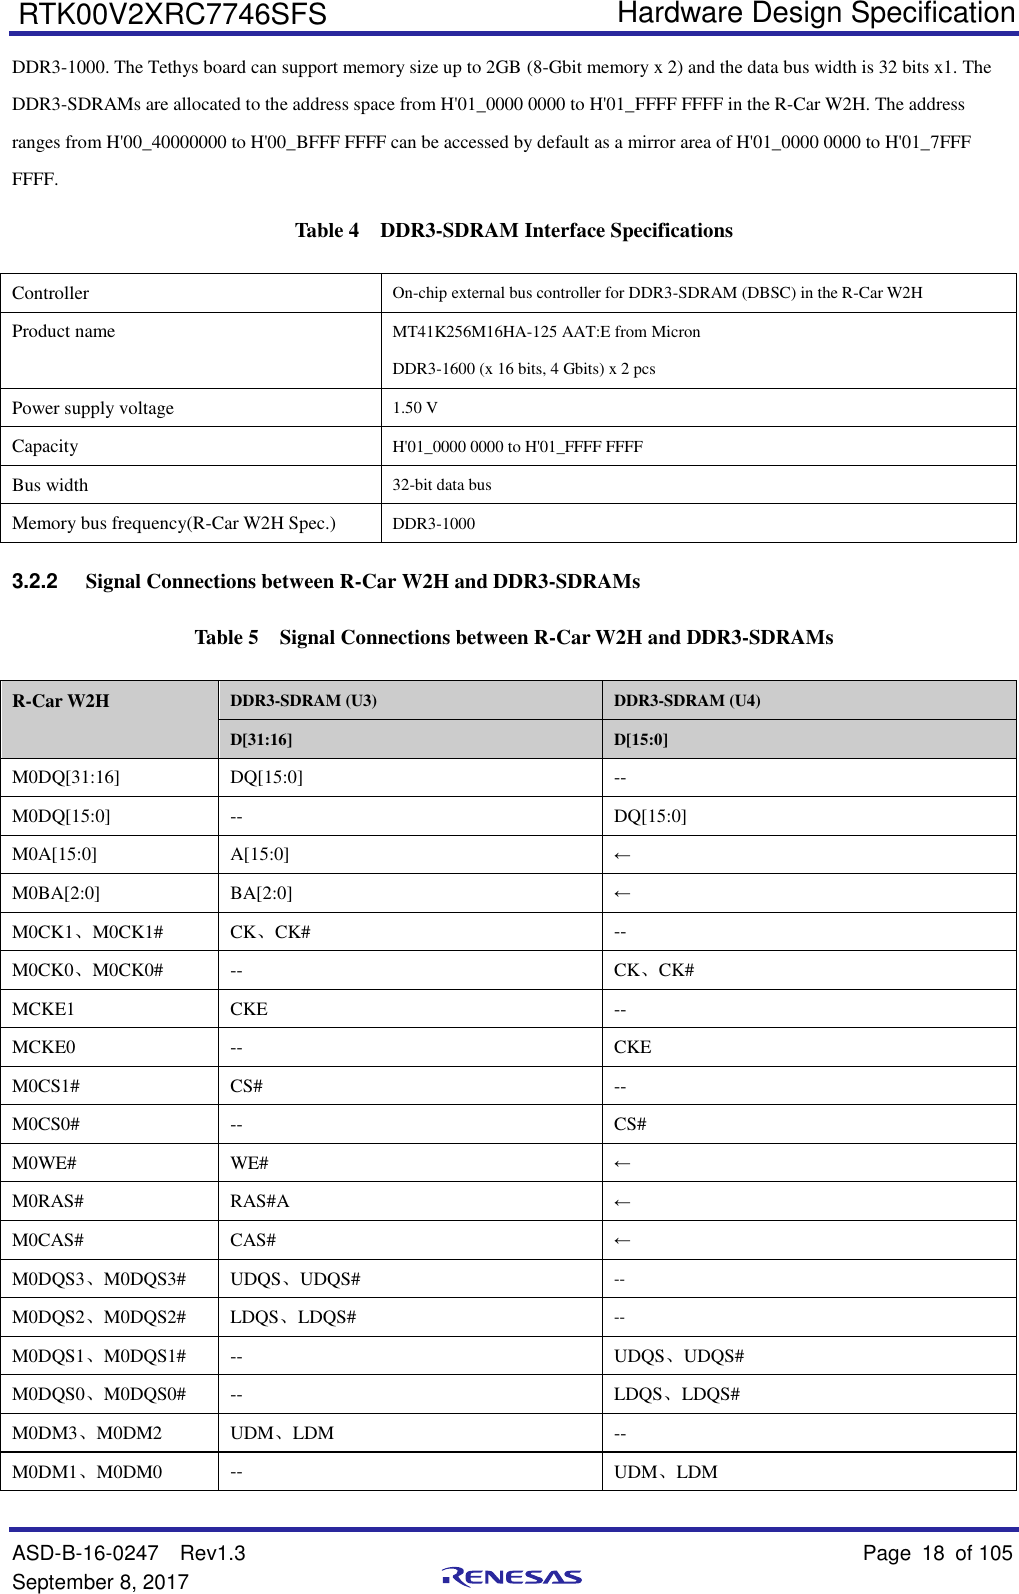   Hardware Design Specification ASD-B-16-0247  Rev1.3    Page 18  of 105 September 8, 2017      RTK00V2XRC7746SFS DDR3-1000. The Tethys board can support memory size up to 2GB (8-Gbit memory x 2) and the data bus width is 32 bits x1. The DDR3-SDRAMs are allocated to the address space from H&apos;01_0000 0000 to H&apos;01_FFFF FFFF in the R-Car W2H. The address ranges from H&apos;00_40000000 to H&apos;00_BFFF FFFF can be accessed by default as a mirror area of H&apos;01_0000 0000 to H&apos;01_7FFF FFFF. Table 4  DDR3-SDRAM Interface Specifications Controller On-chip external bus controller for DDR3-SDRAM (DBSC) in the R-Car W2H Product name MT41K256M16HA-125 AAT:E from Micron   DDR3-1600 (x 16 bits, 4 Gbits) x 2 pcs   Power supply voltage 1.50 V Capacity H&apos;01_0000 0000 to H&apos;01_FFFF FFFF Bus width 32-bit data bus Memory bus frequency(R-Car W2H Spec.) DDR3-1000 3.2.2 Signal Connections between R-Car W2H and DDR3-SDRAMs Table 5  Signal Connections between R-Car W2H and DDR3-SDRAMs R-Car W2H DDR3-SDRAM (U3) DDR3-SDRAM (U4) D[31:16] D[15:0] M0DQ[31:16] DQ[15:0] -- M0DQ[15:0] -- DQ[15:0] M0A[15:0] A[15:0] ← M0BA[2:0] BA[2:0] ← M0CK1、M0CK1# CK、CK# -- M0CK0、M0CK0# -- CK、CK# MCKE1 CKE -- MCKE0 -- CKE M0CS1# CS# -- M0CS0# -- CS# M0WE# WE# ← M0RAS# RAS#A ← M0CAS# CAS# ← M0DQS3、M0DQS3# UDQS、UDQS# -- M0DQS2、M0DQS2# LDQS、LDQS# -- M0DQS1、M0DQS1# -- UDQS、UDQS# M0DQS0、M0DQS0# -- LDQS、LDQS# M0DM3、M0DM2 UDM、LDM -- M0DM1、M0DM0 -- UDM、LDM 